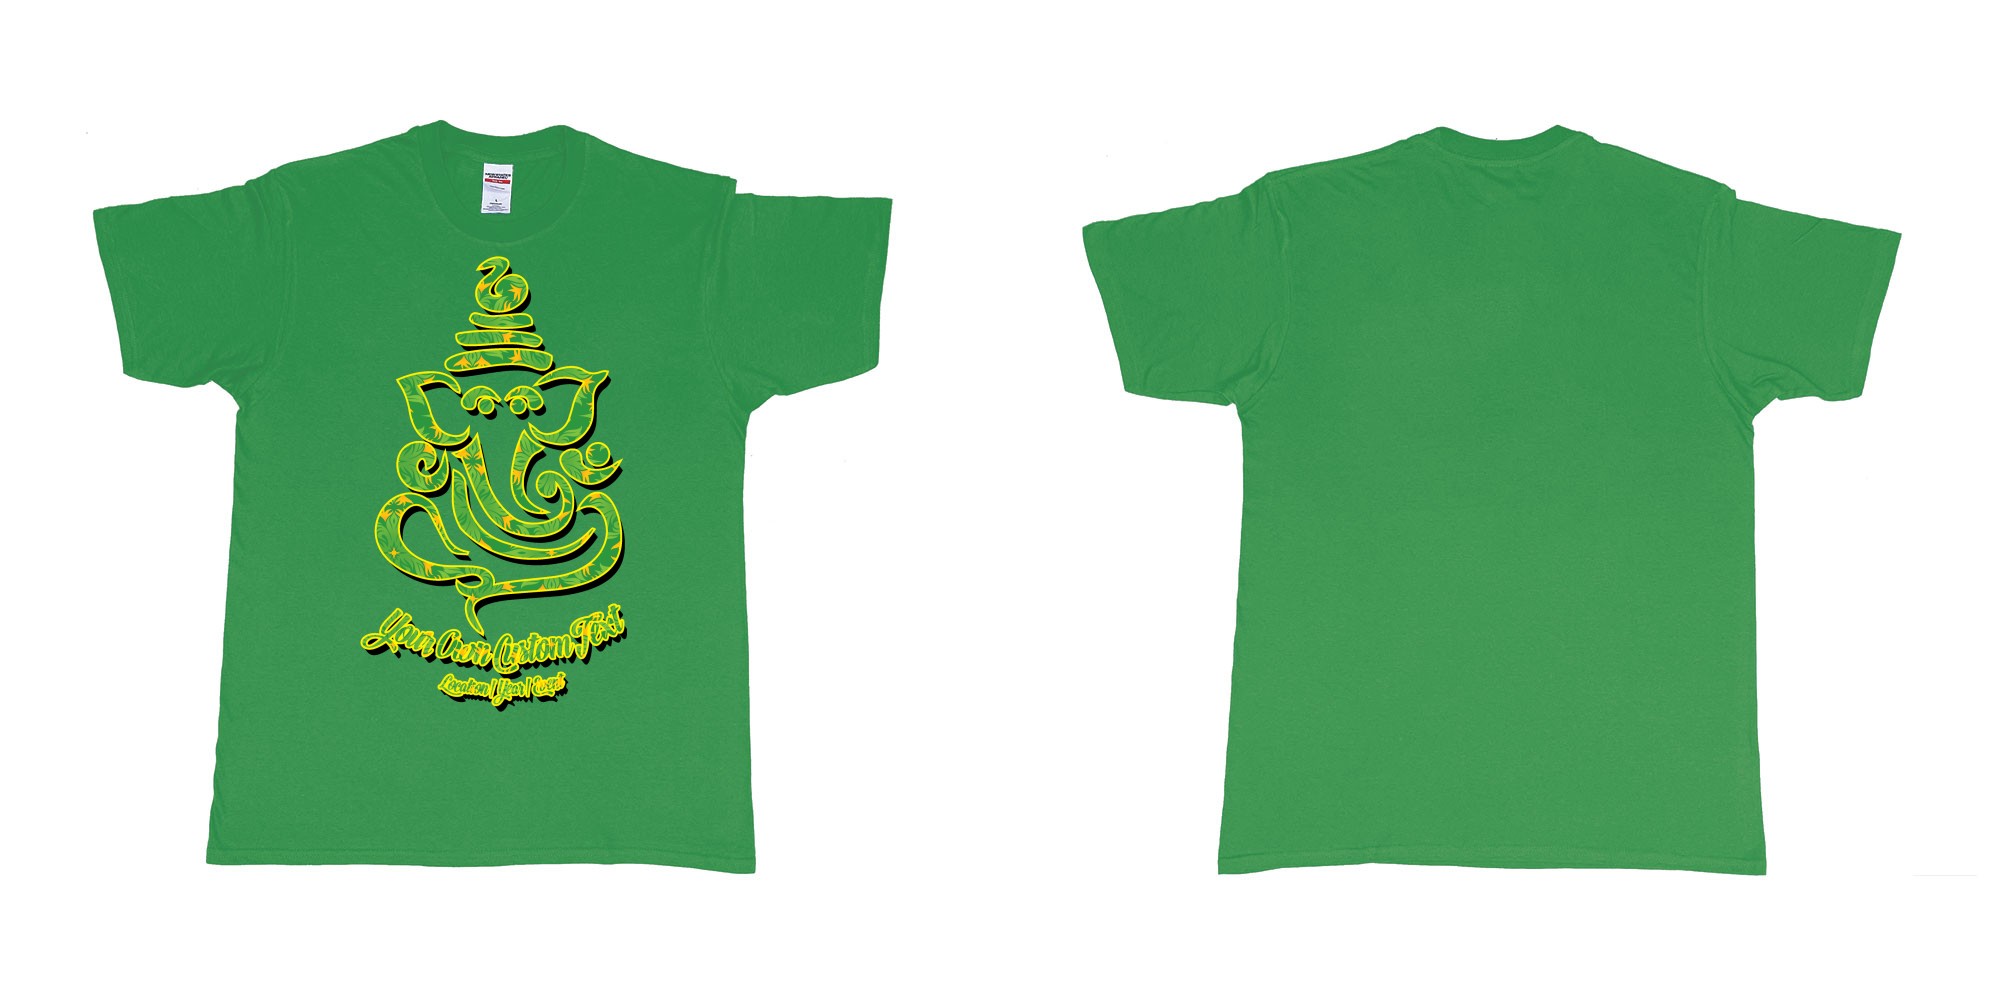 Custom tshirt design ganesh soft jungle yoga customize own design in fabric color irish-green choice your own text made in Bali by The Pirate Way